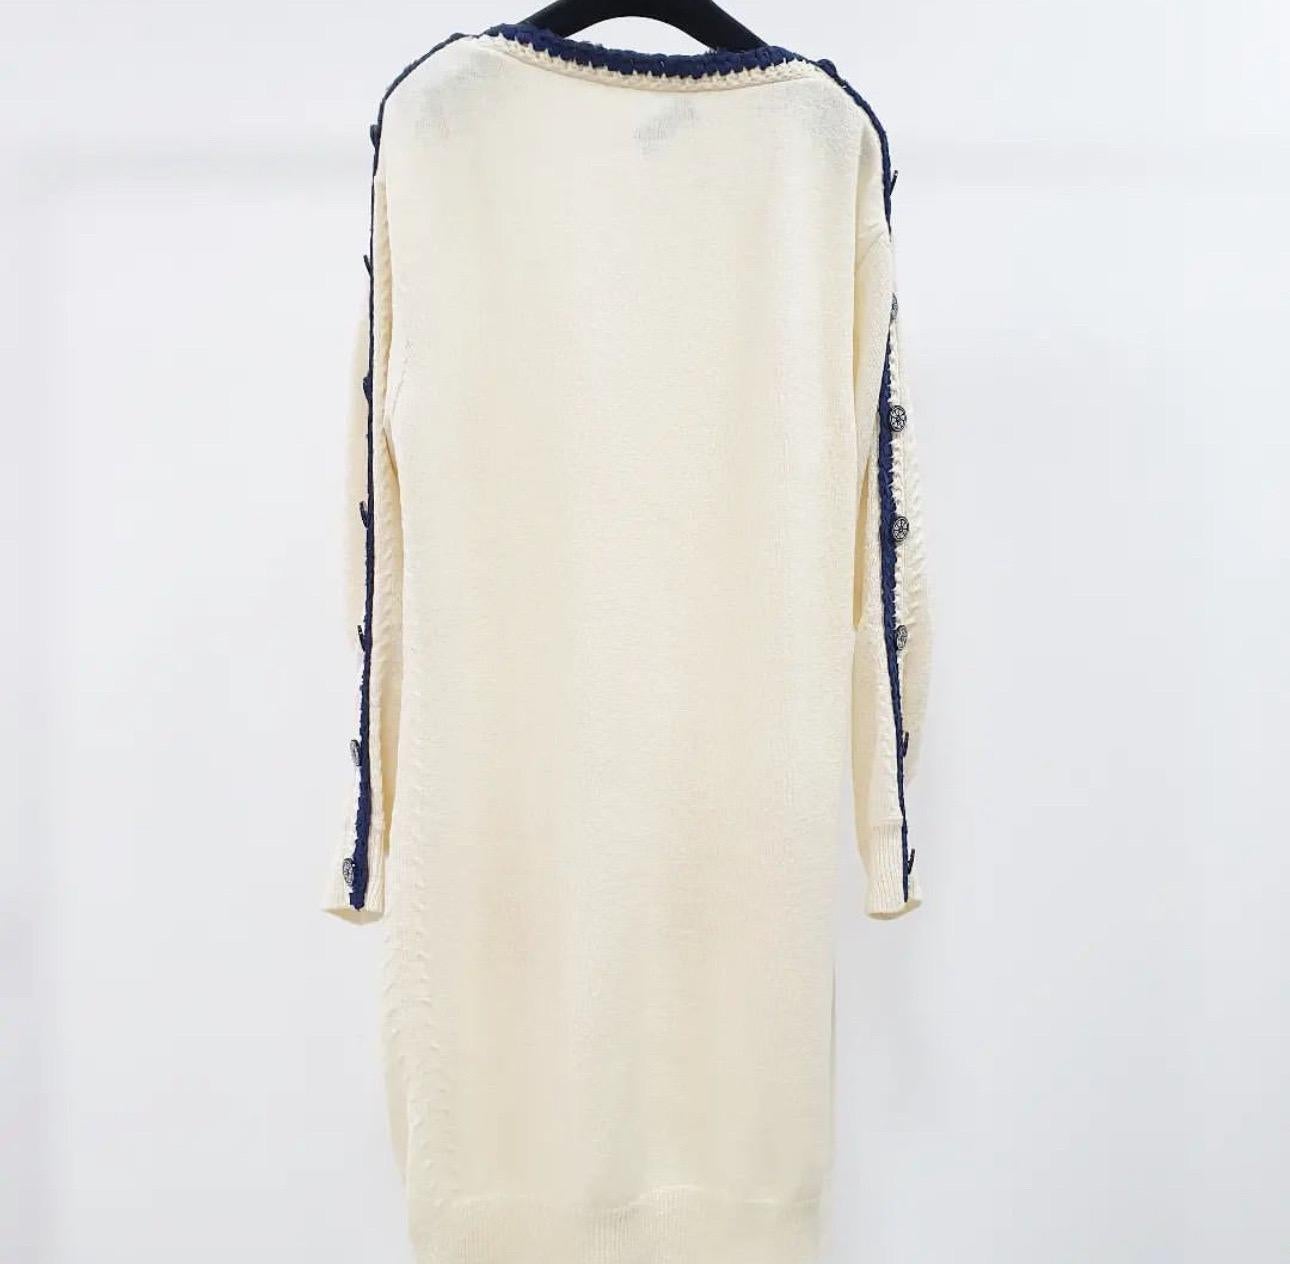 Gorgeous Chanel Cruise 2016 Paris-Seoul Collection knit dress.
Size 38, 
Excellent barely worn condition
Hits about knee length, length depends on height
Retailed $3100 plus tax